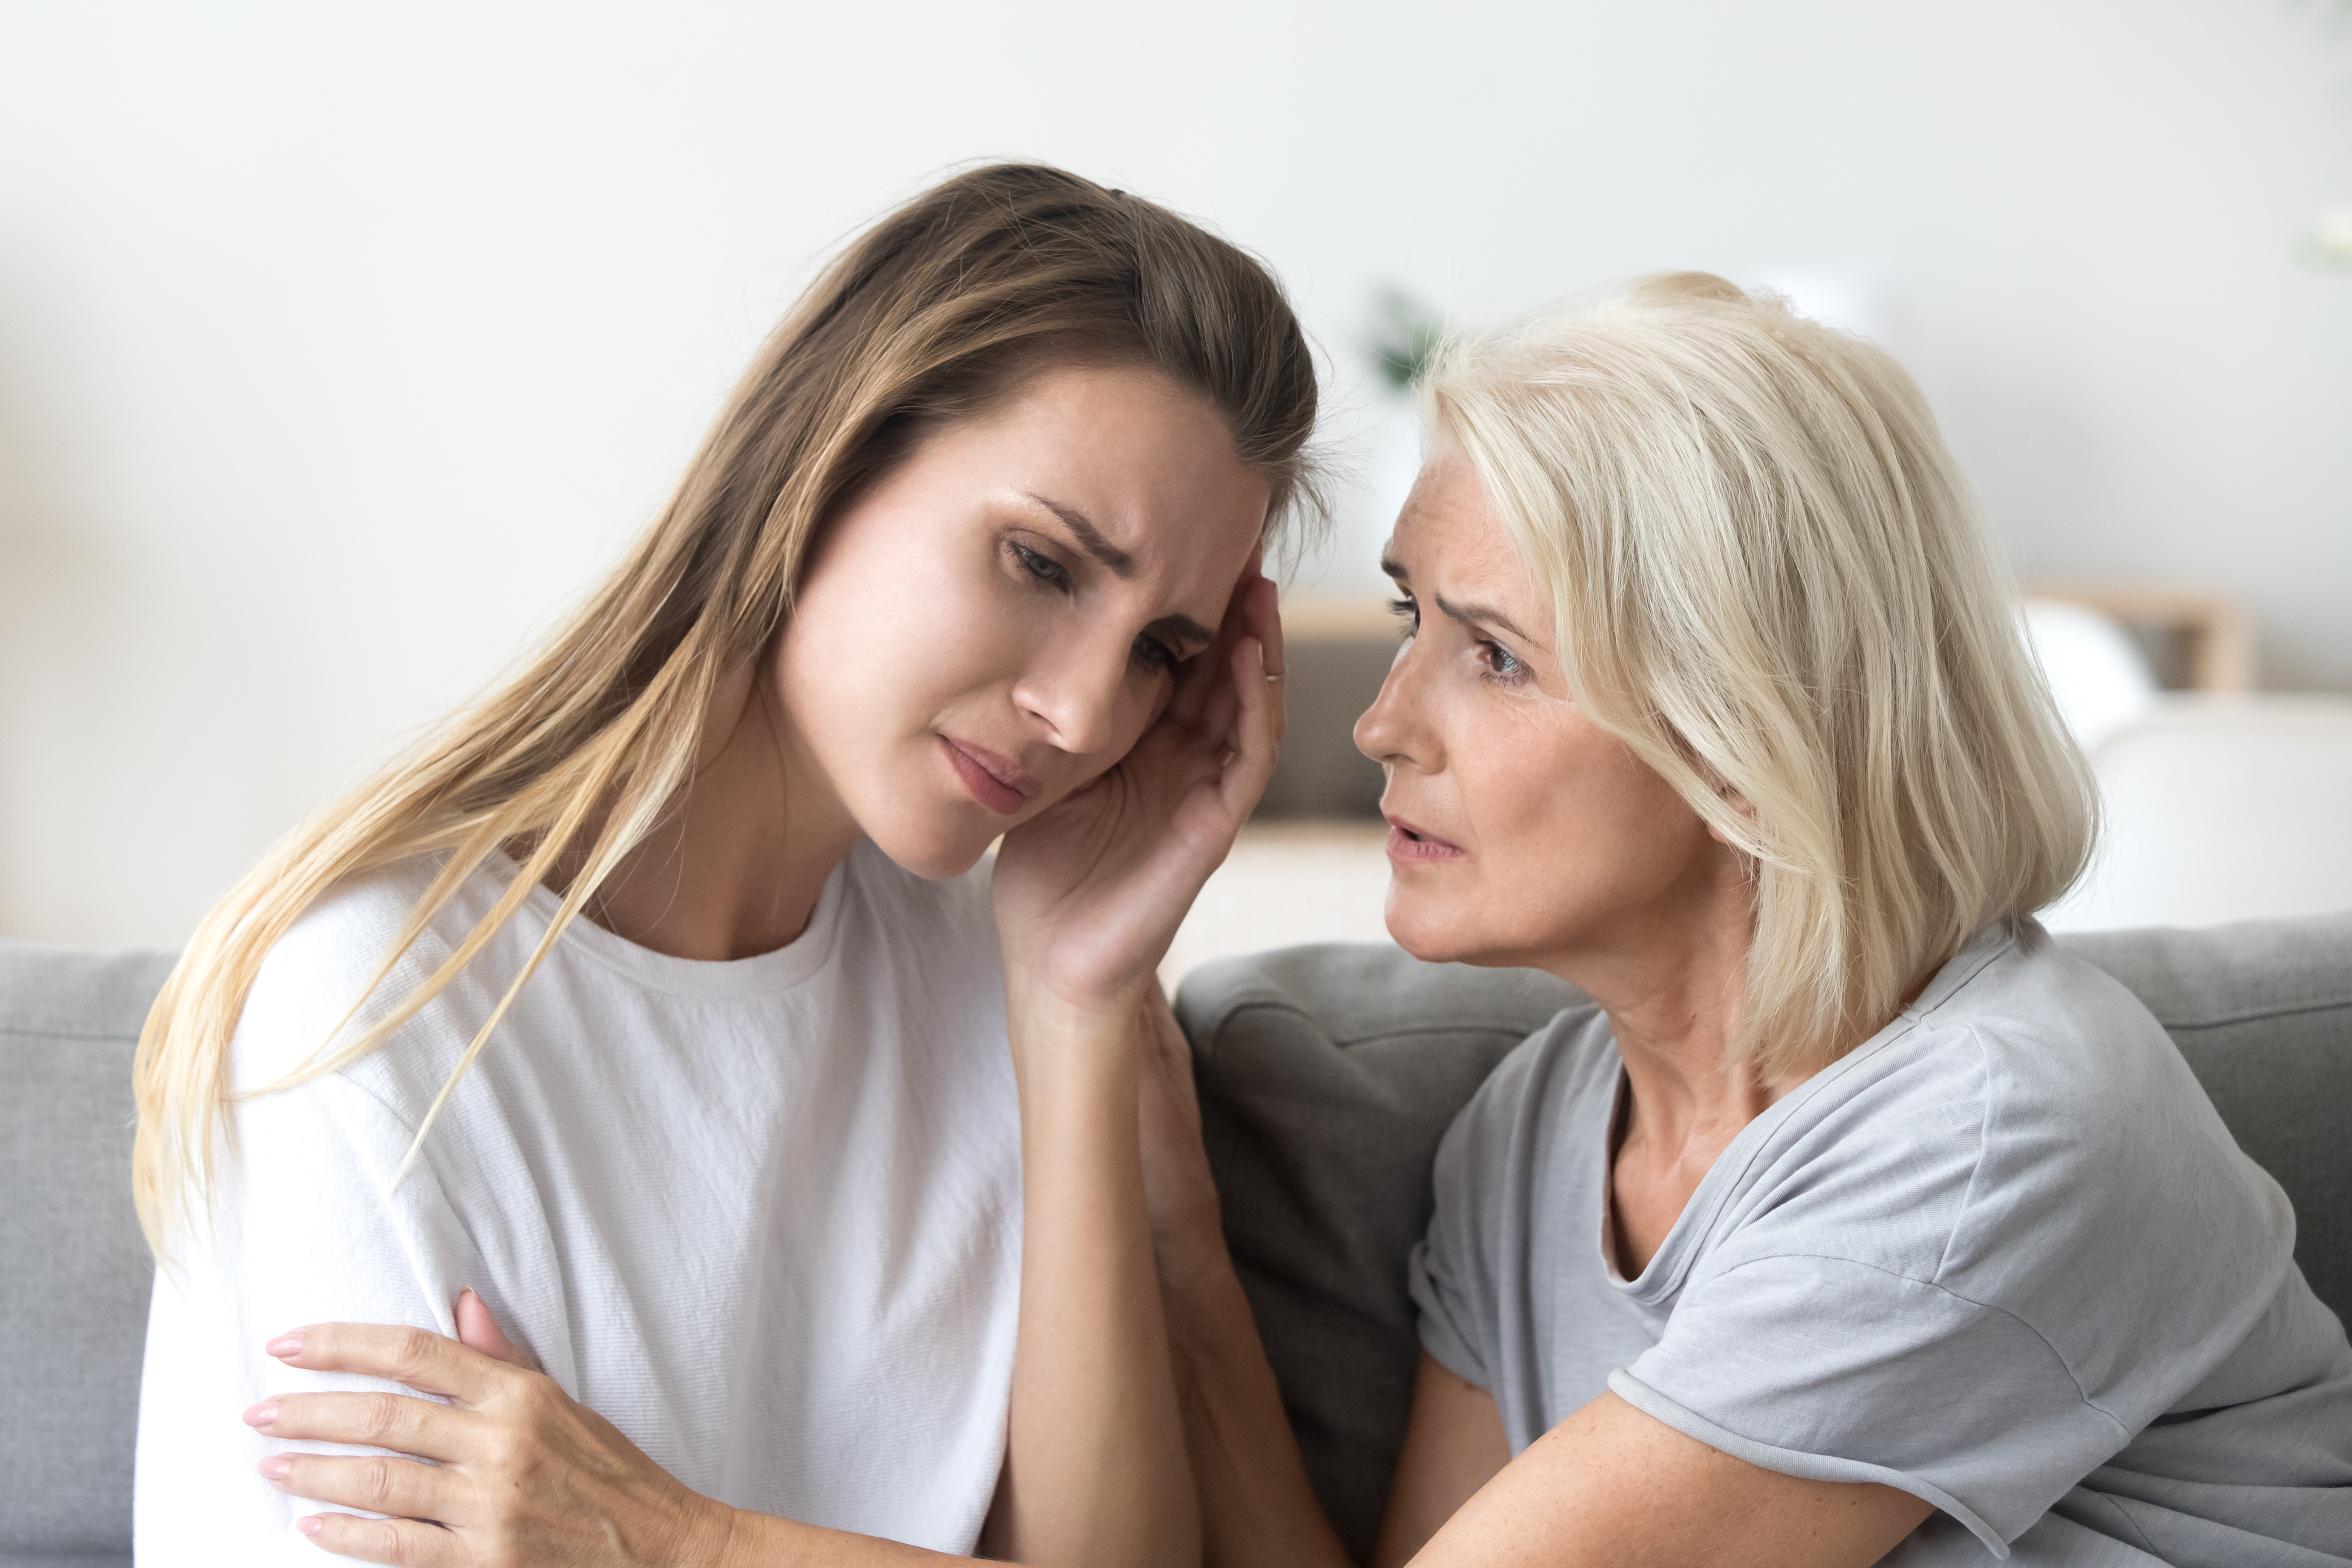 An older woman consoling a worried younger woman | Source: Shutterstock